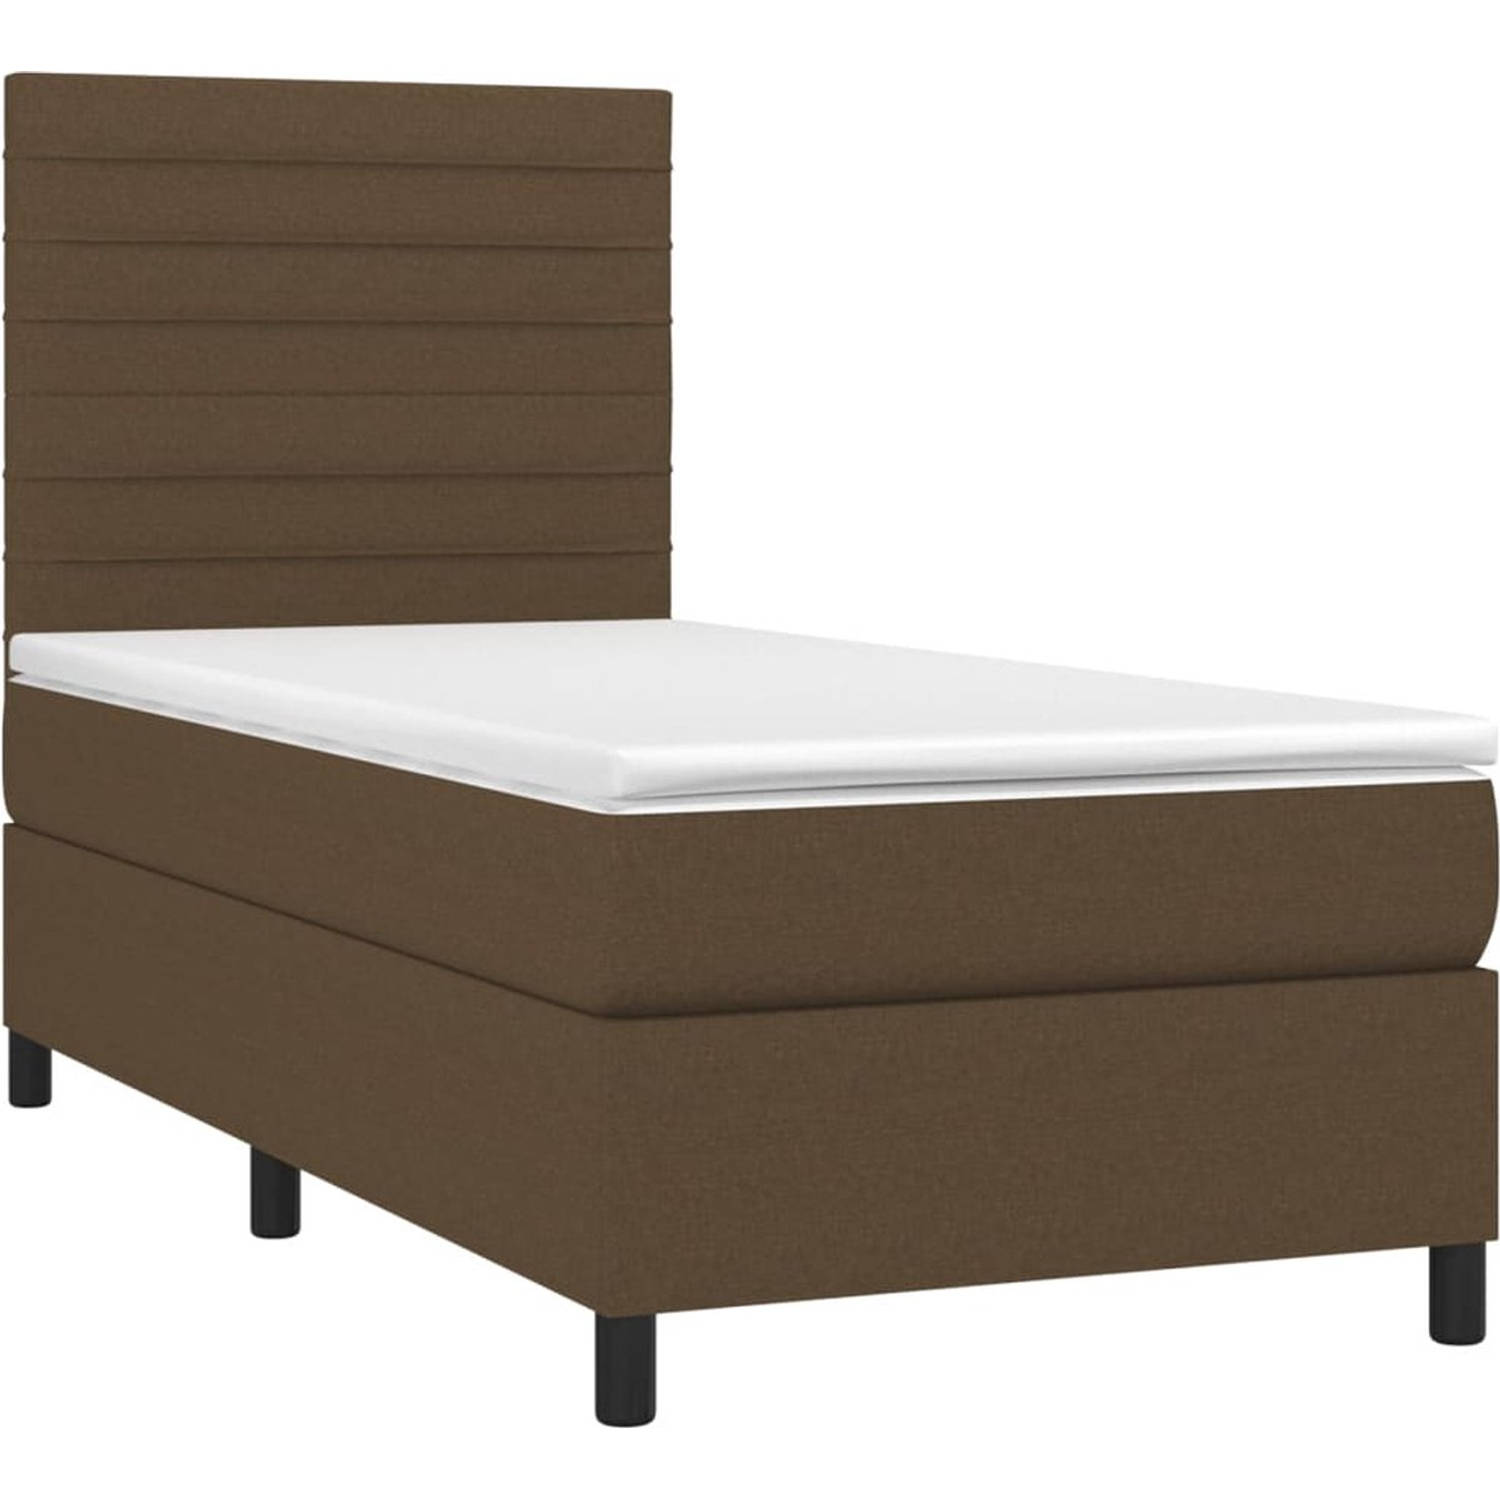 The Living Store Boxspringbed - The Living Store - Bed - 203 x 100 x 118/128 cm - Donkerbruin stof - Verstelbaar